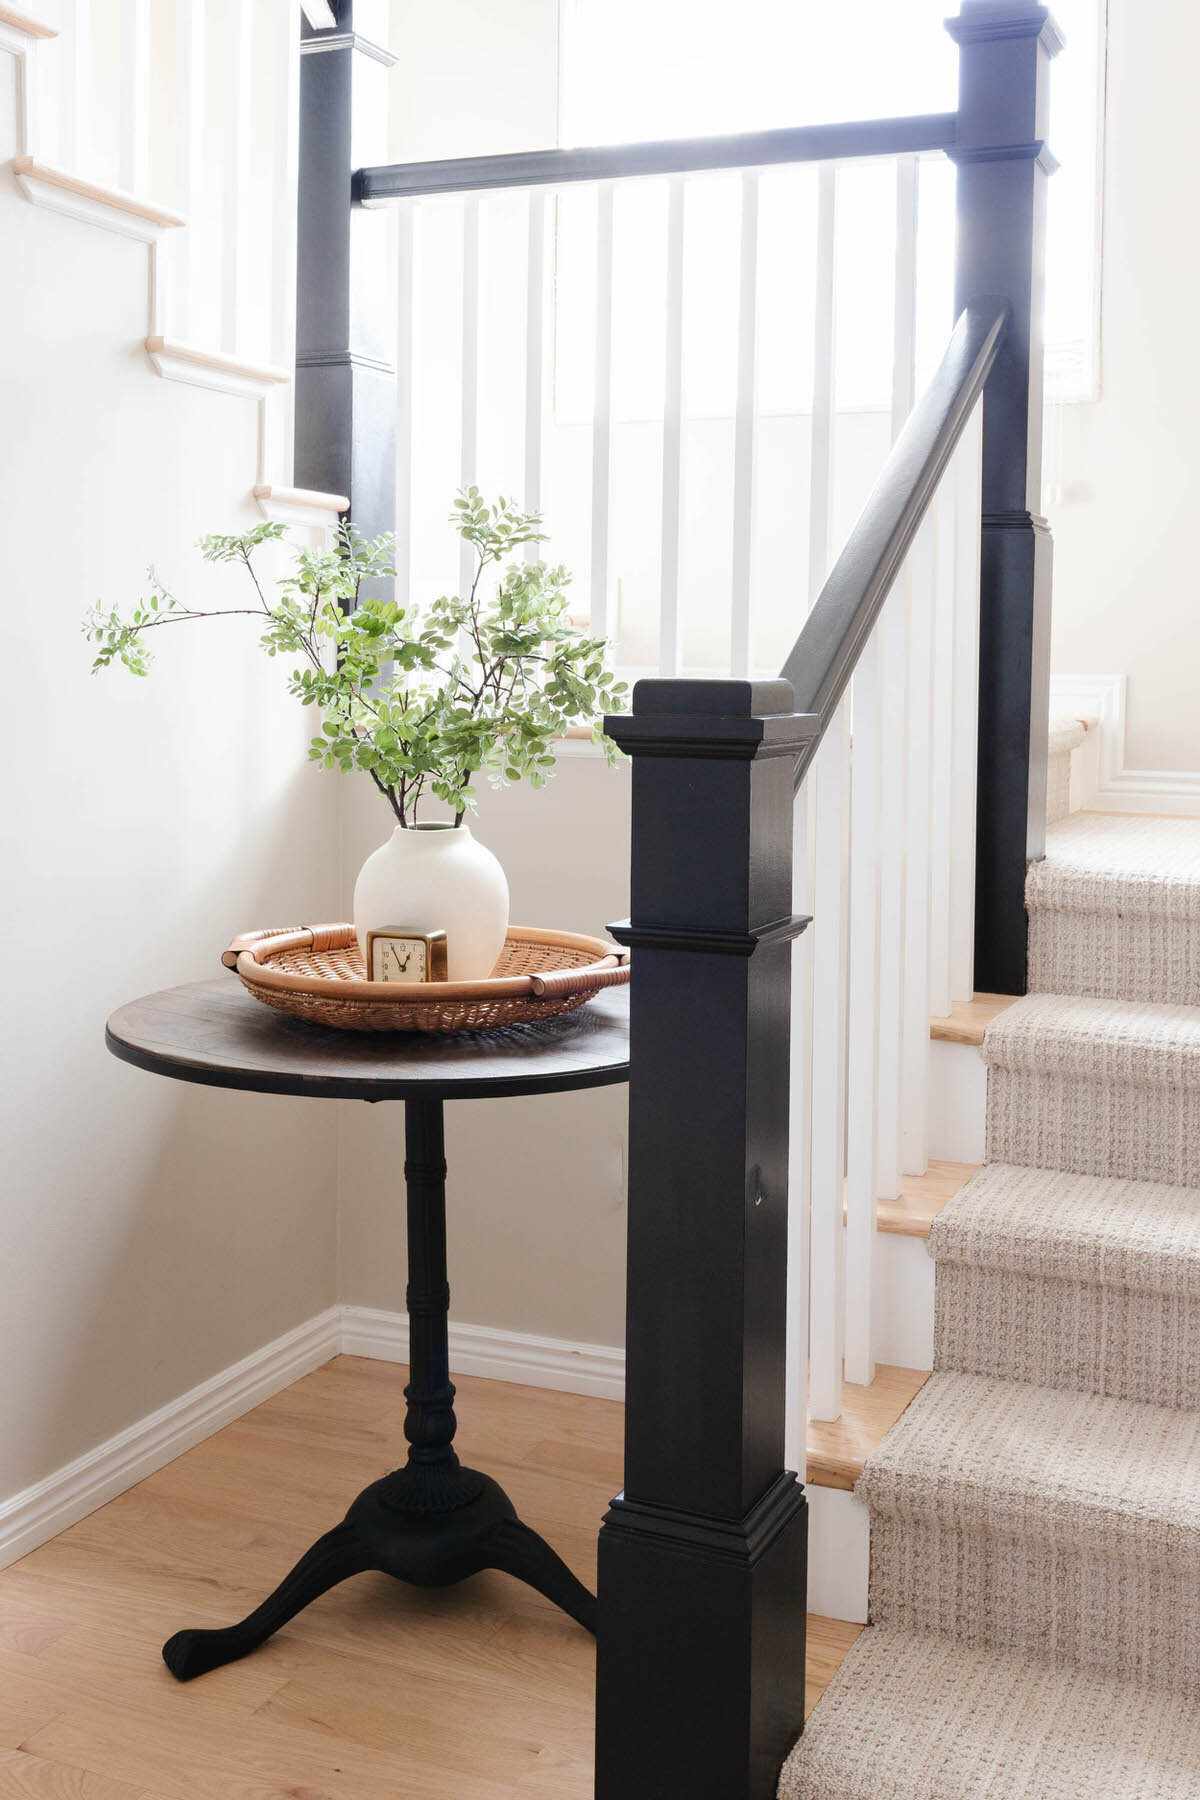 Modern Farmhouse Charming Cottage Warm White and Black Staircase Stairway Entryway by Peggy Haddad Interiors40